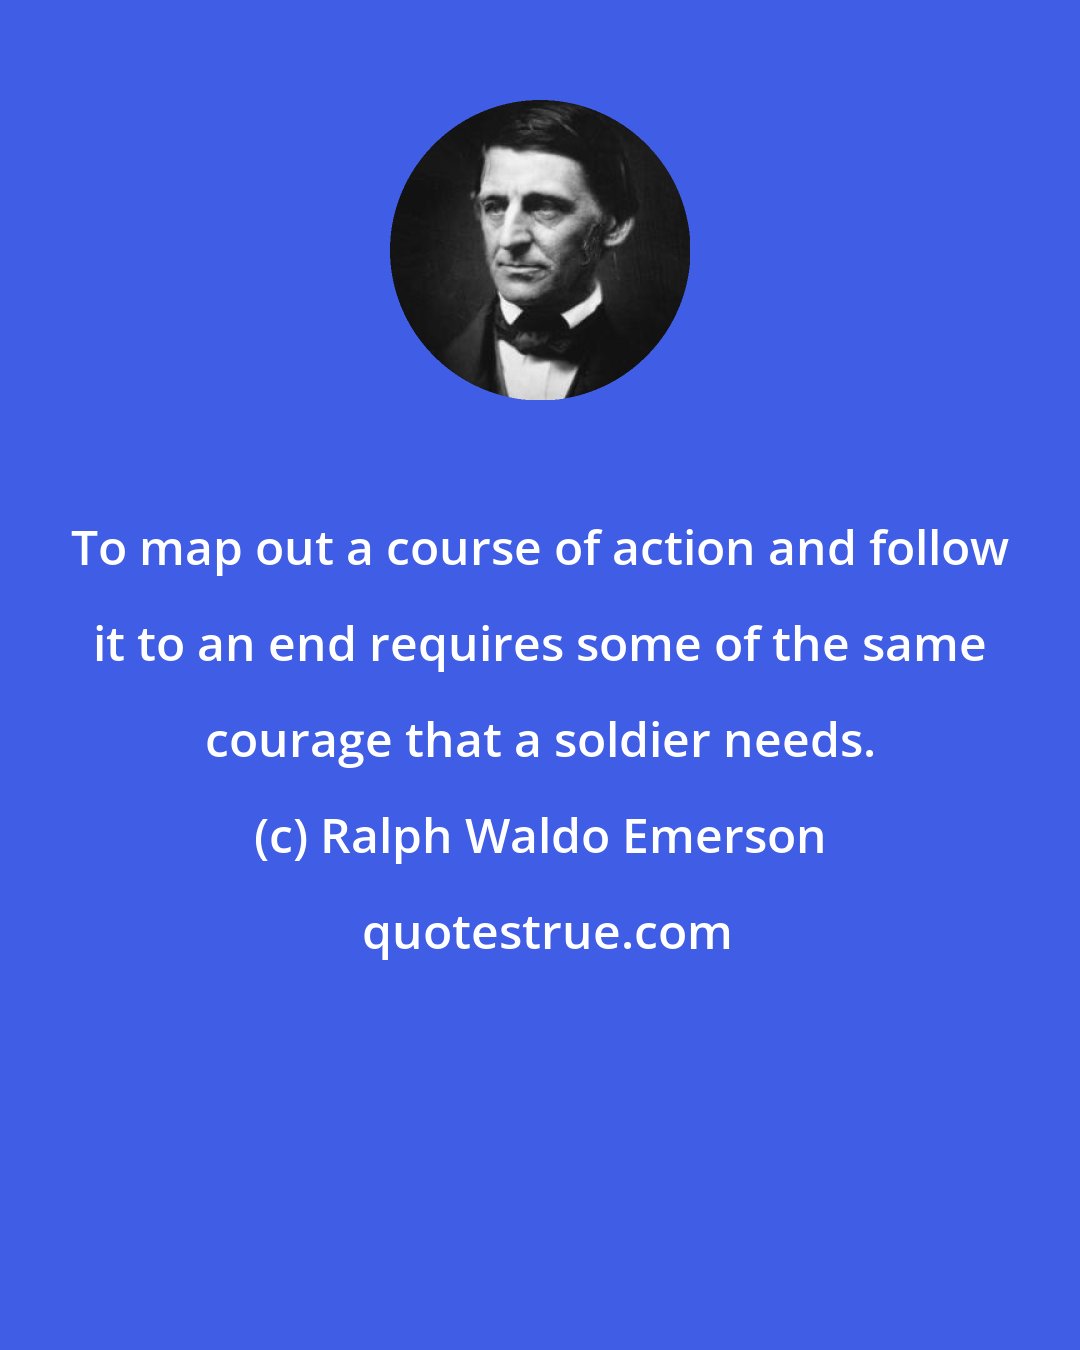 Ralph Waldo Emerson: To map out a course of action and follow it to an end requires some of the same courage that a soldier needs.